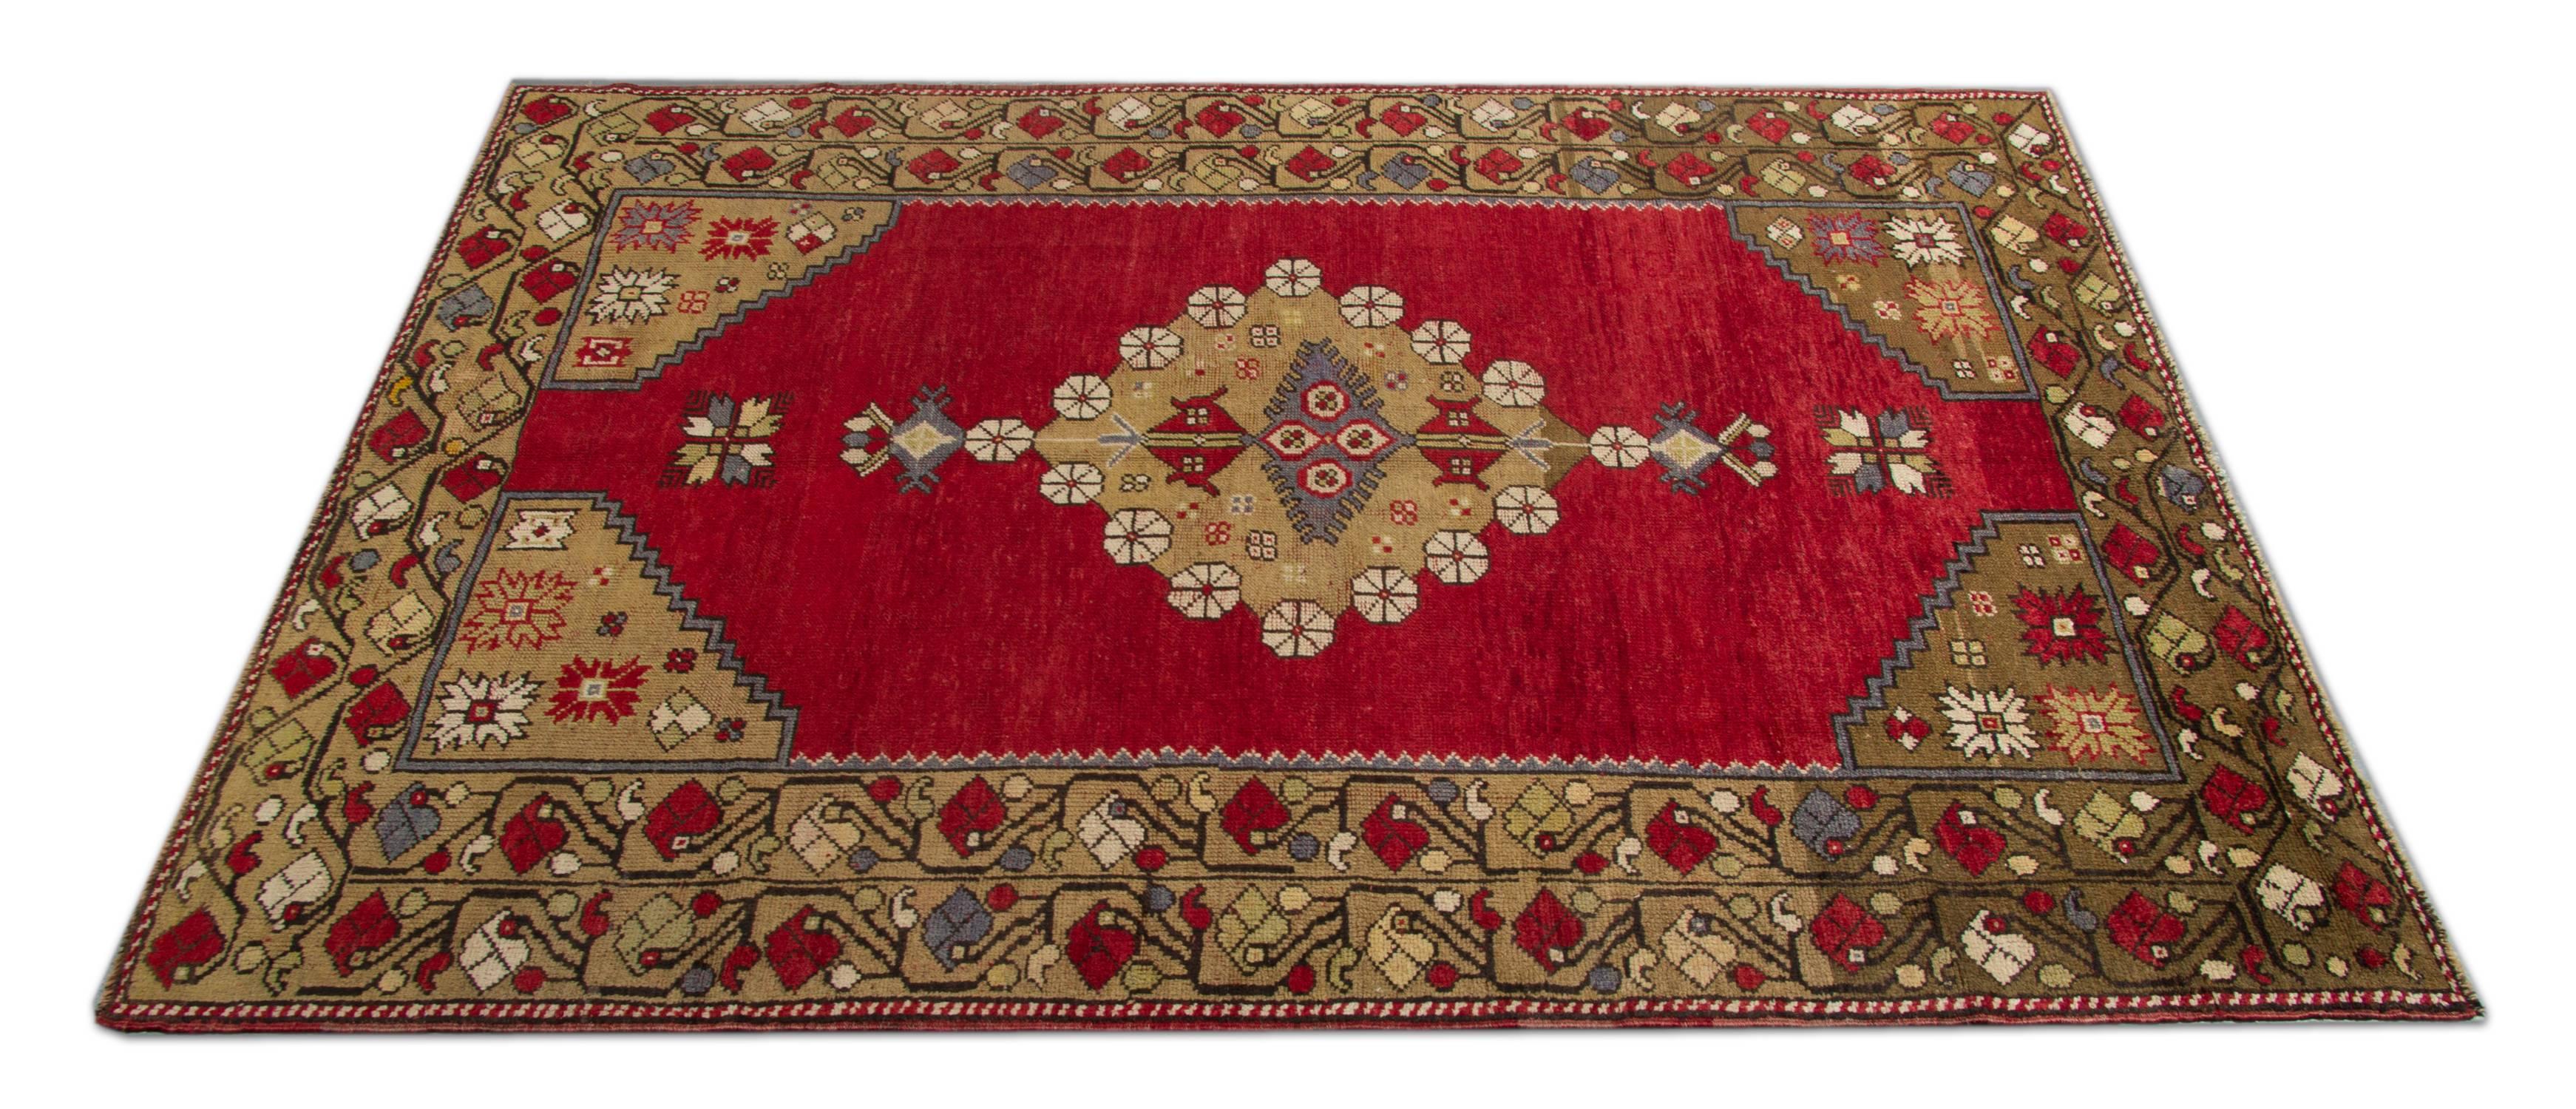 Old Handmade carpet Anatolian antique rugs with a red rug background and contrasting central gold medallion. This carpet oriental rug is Ushak and is in excellent condition. It can be a very good selection as living room rugs and dining room rug.